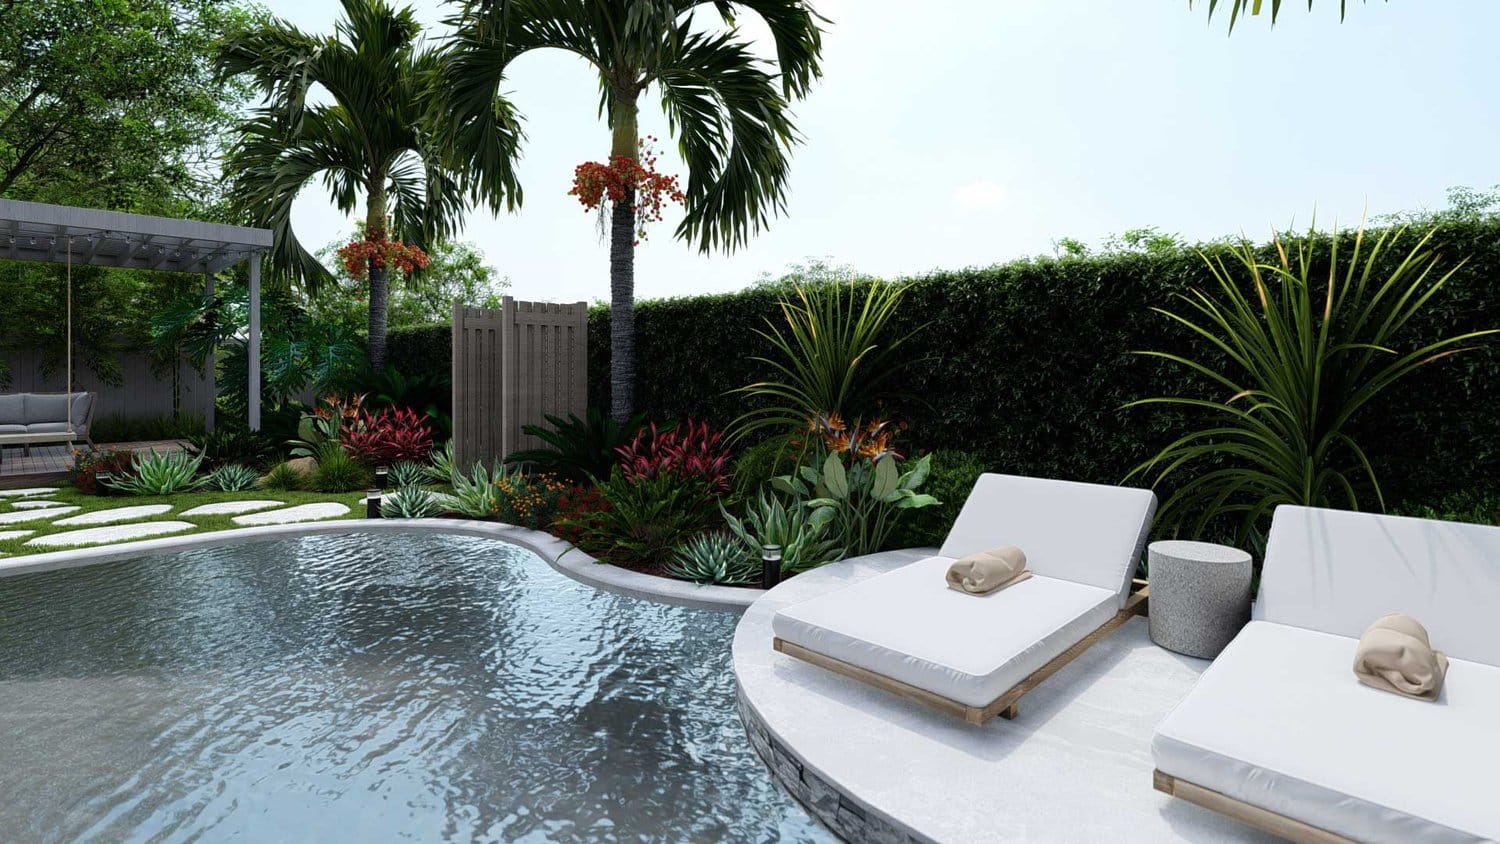 Tampa backyard pool garden design with concrete deck with sun loungers